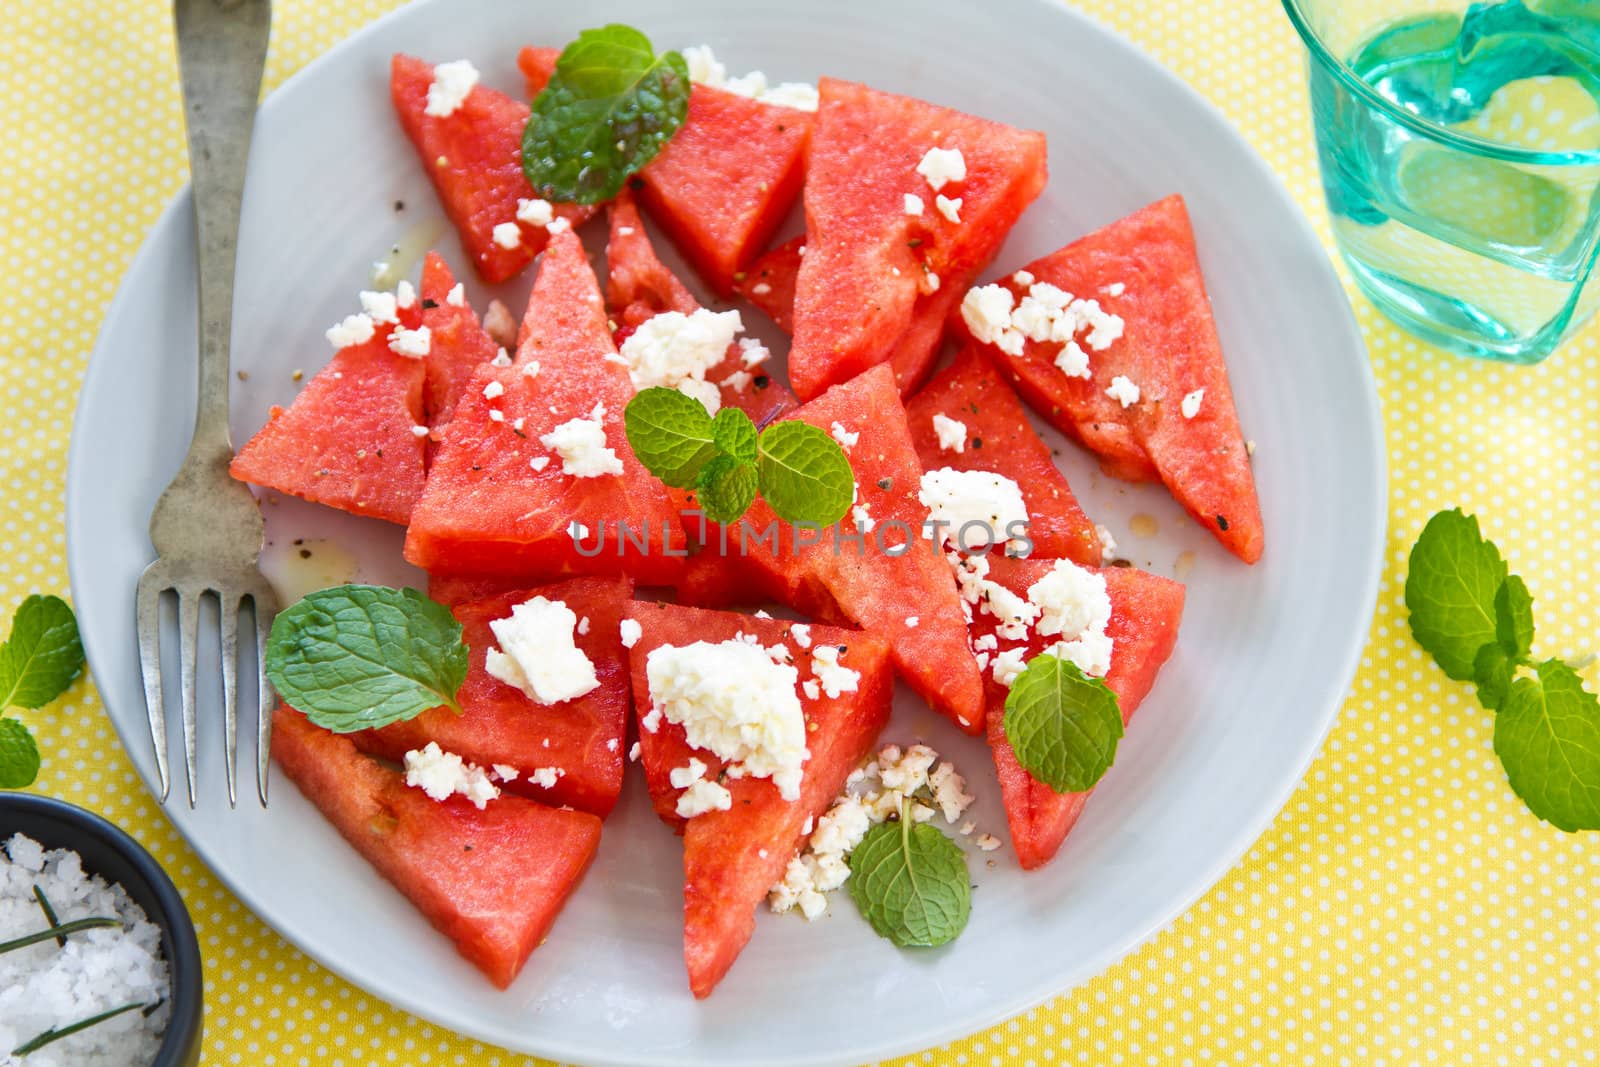 Watermelon with Feta cheese and mint salad